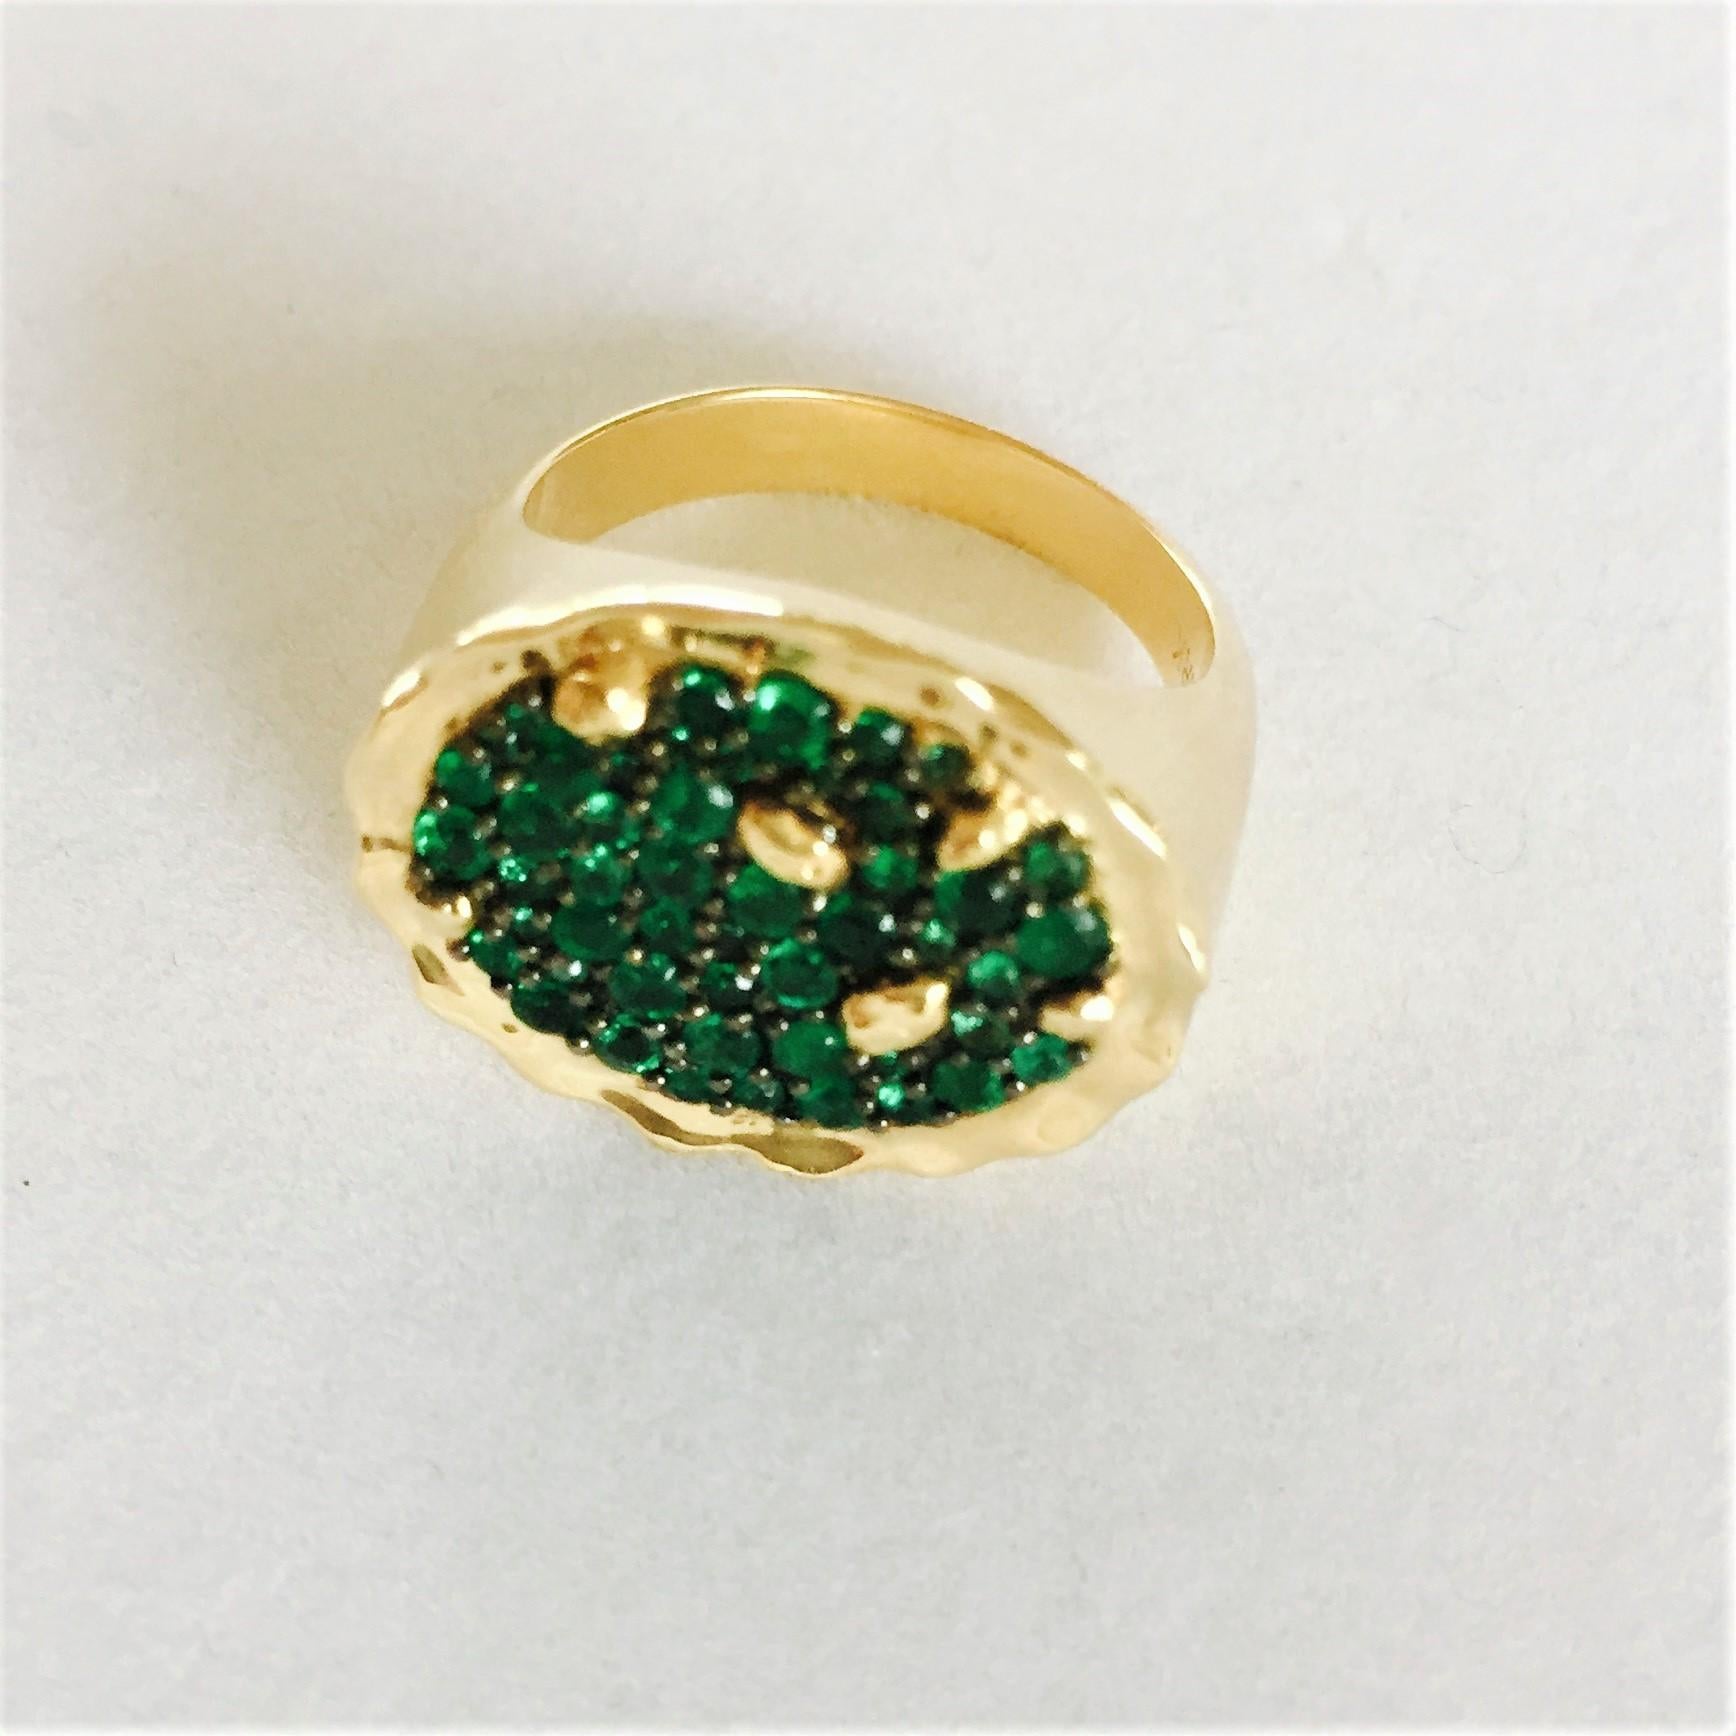 The STENMARK Positano ring in 18 karat yellow gold and emerald was inspired by the dramatic landscape of the Amalfi coast of southern Italy, the gold representing the sandy and rocky coastline edging the blue green water, with gold ‘rocks’ emerging